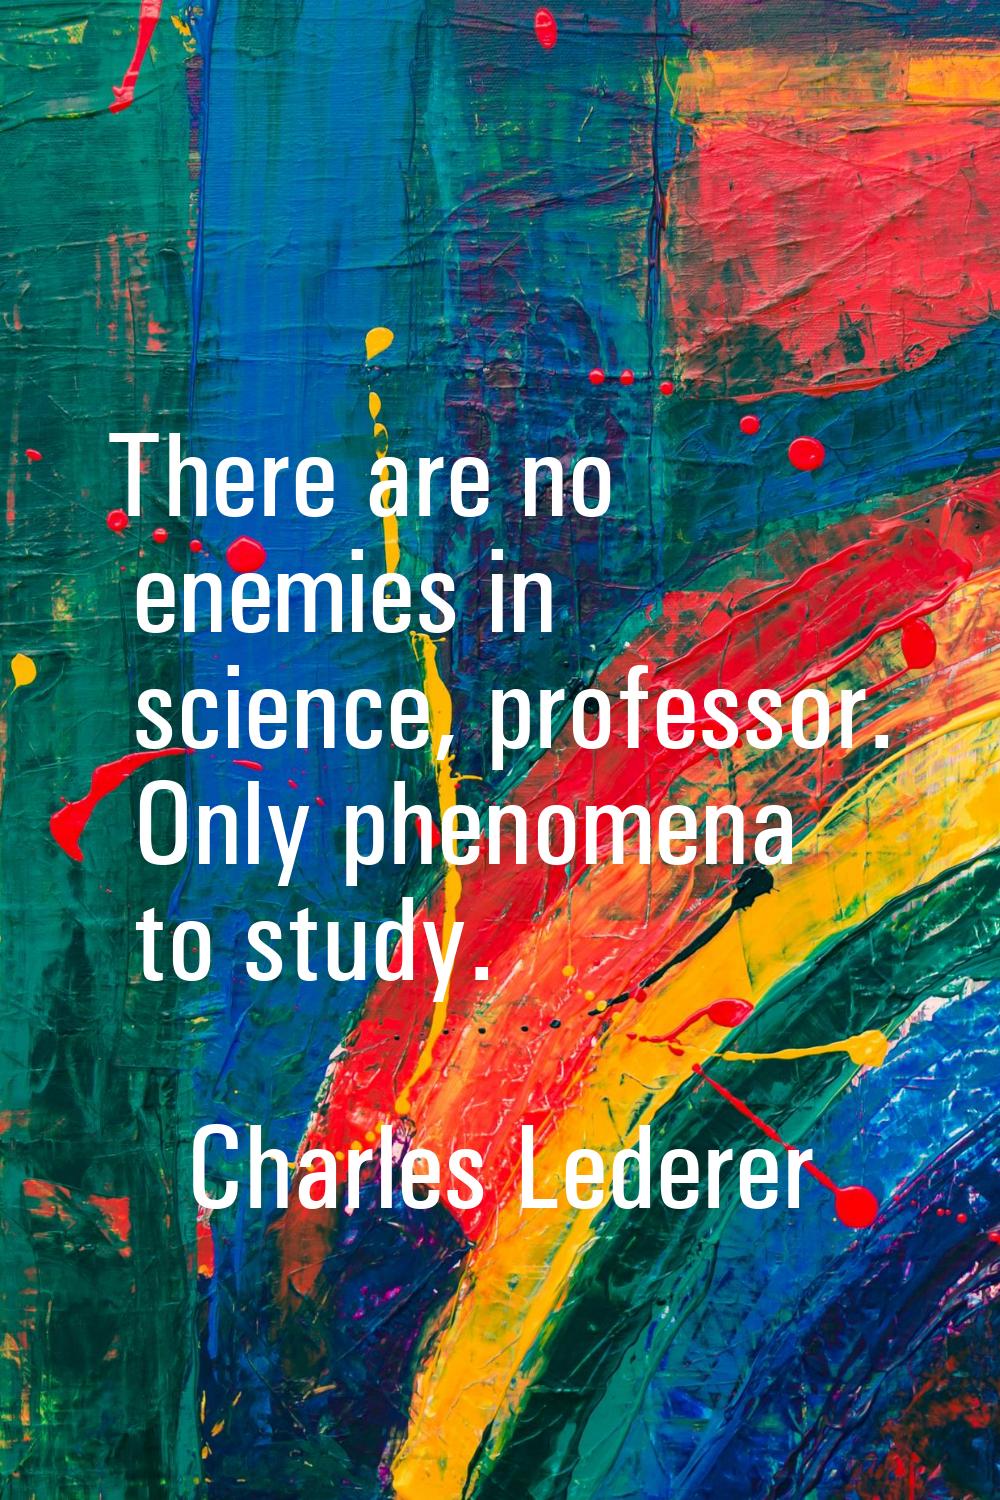 There are no enemies in science, professor. Only phenomena to study.